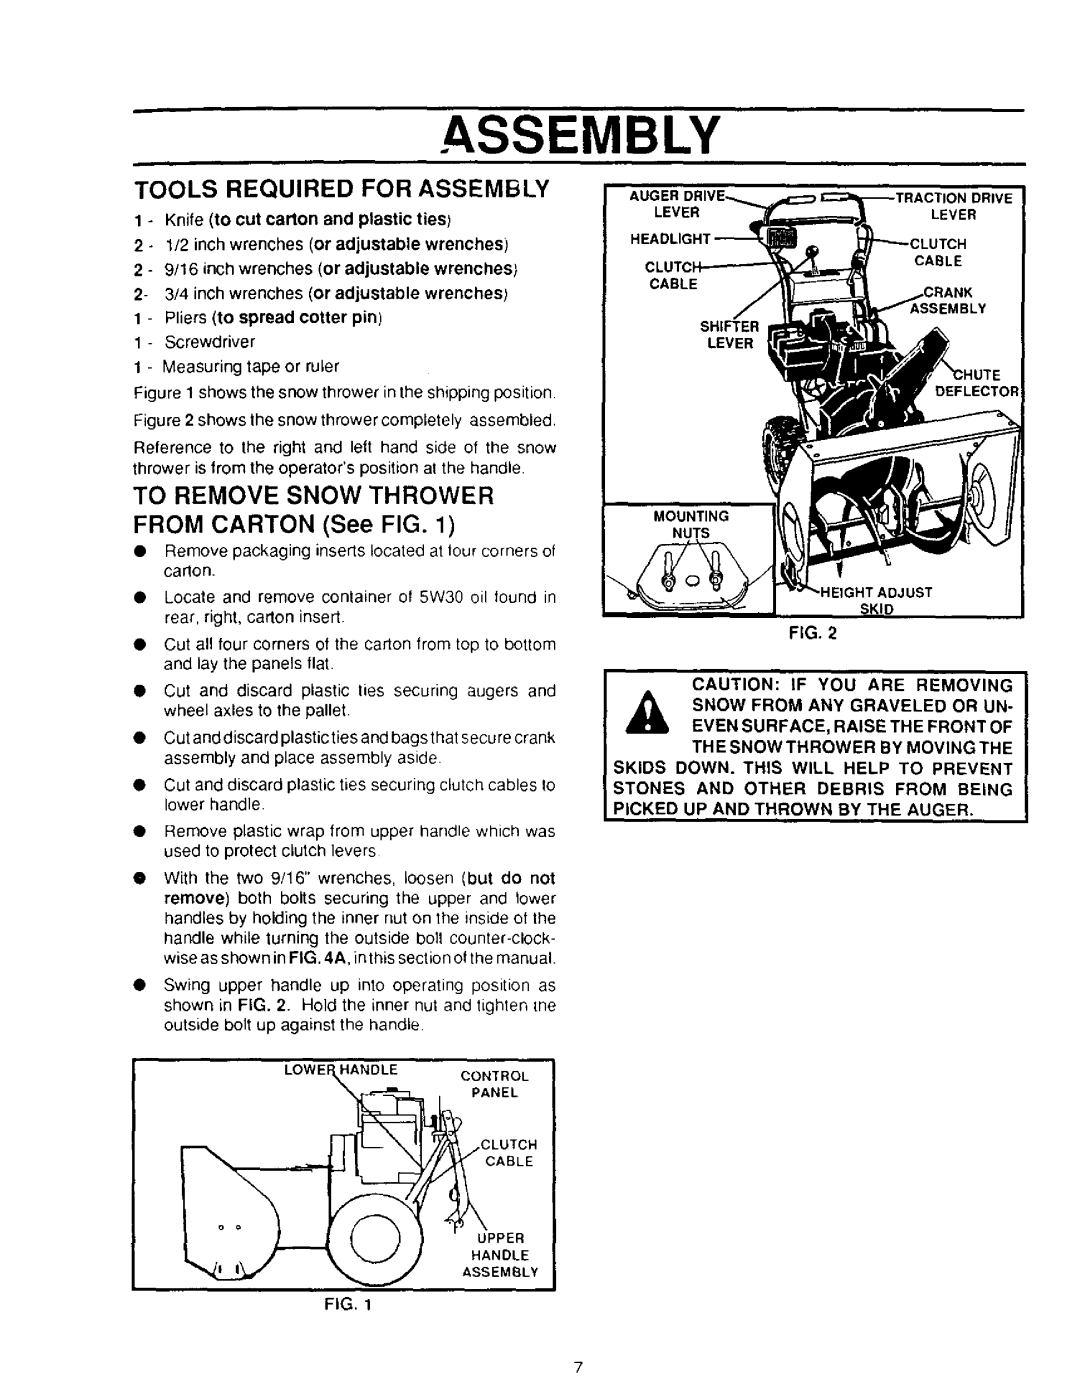 Sears 536.886331 owner manual Tools Required For Assembly, TO REMOVE SNOW THROWER FROM CARTON See FIG 